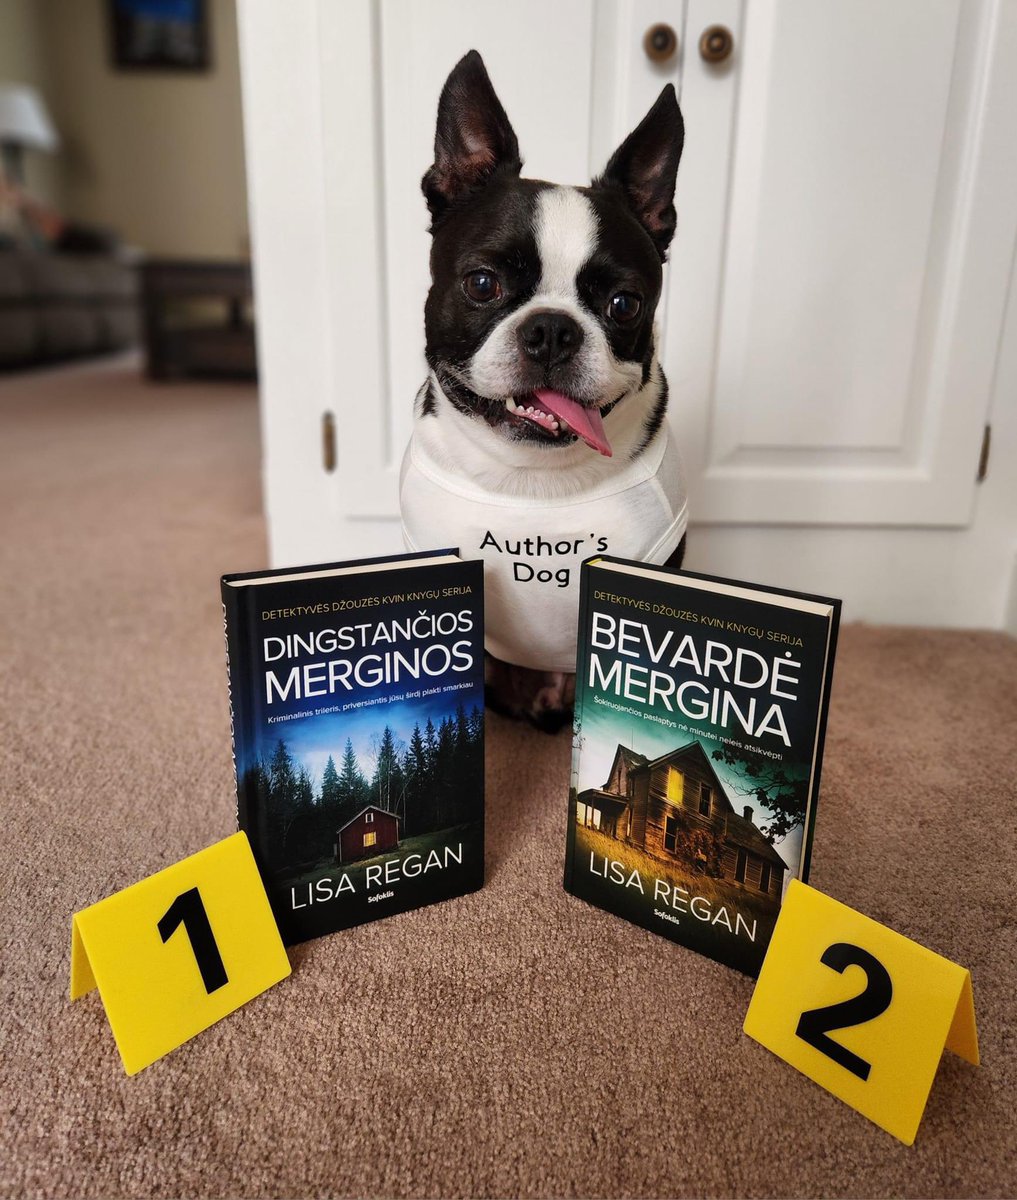 Mr. Phillip presents the gorgeous Lithuanian translations of books 1 and 2 of the Detective Josie Quinn series. Carrots 🥕 were promised. 

#chroniclesofphil #BostonTerrier #authorsdog #josiequinn #josiequinnseries #detectivejosiequinn